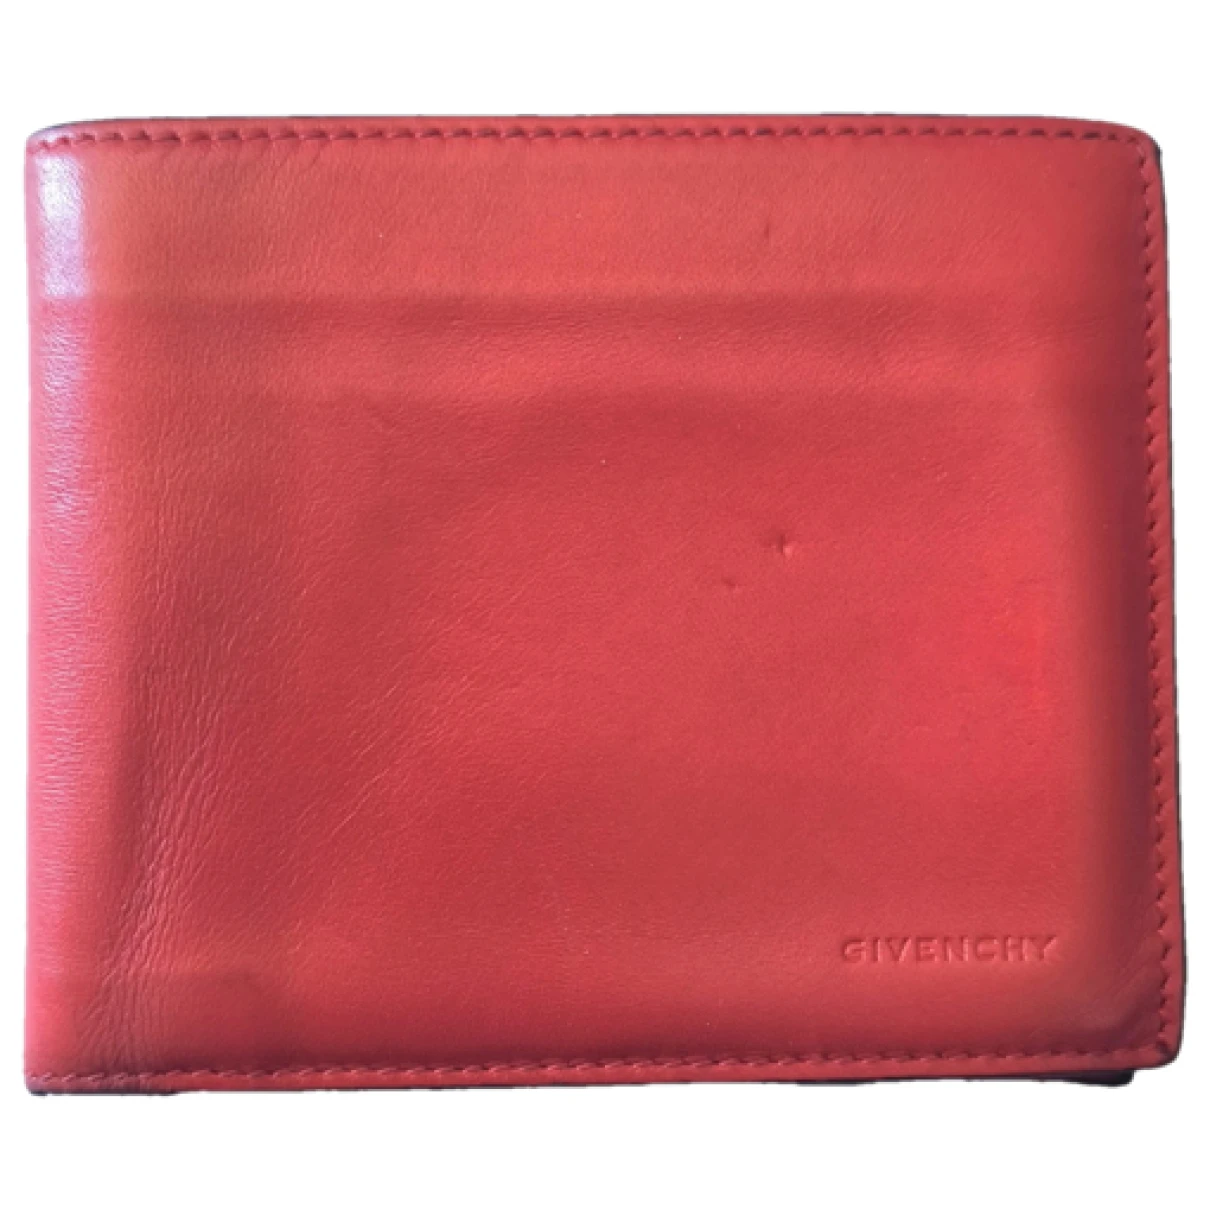 Pre-owned Givenchy Leather Wallet In Burgundy